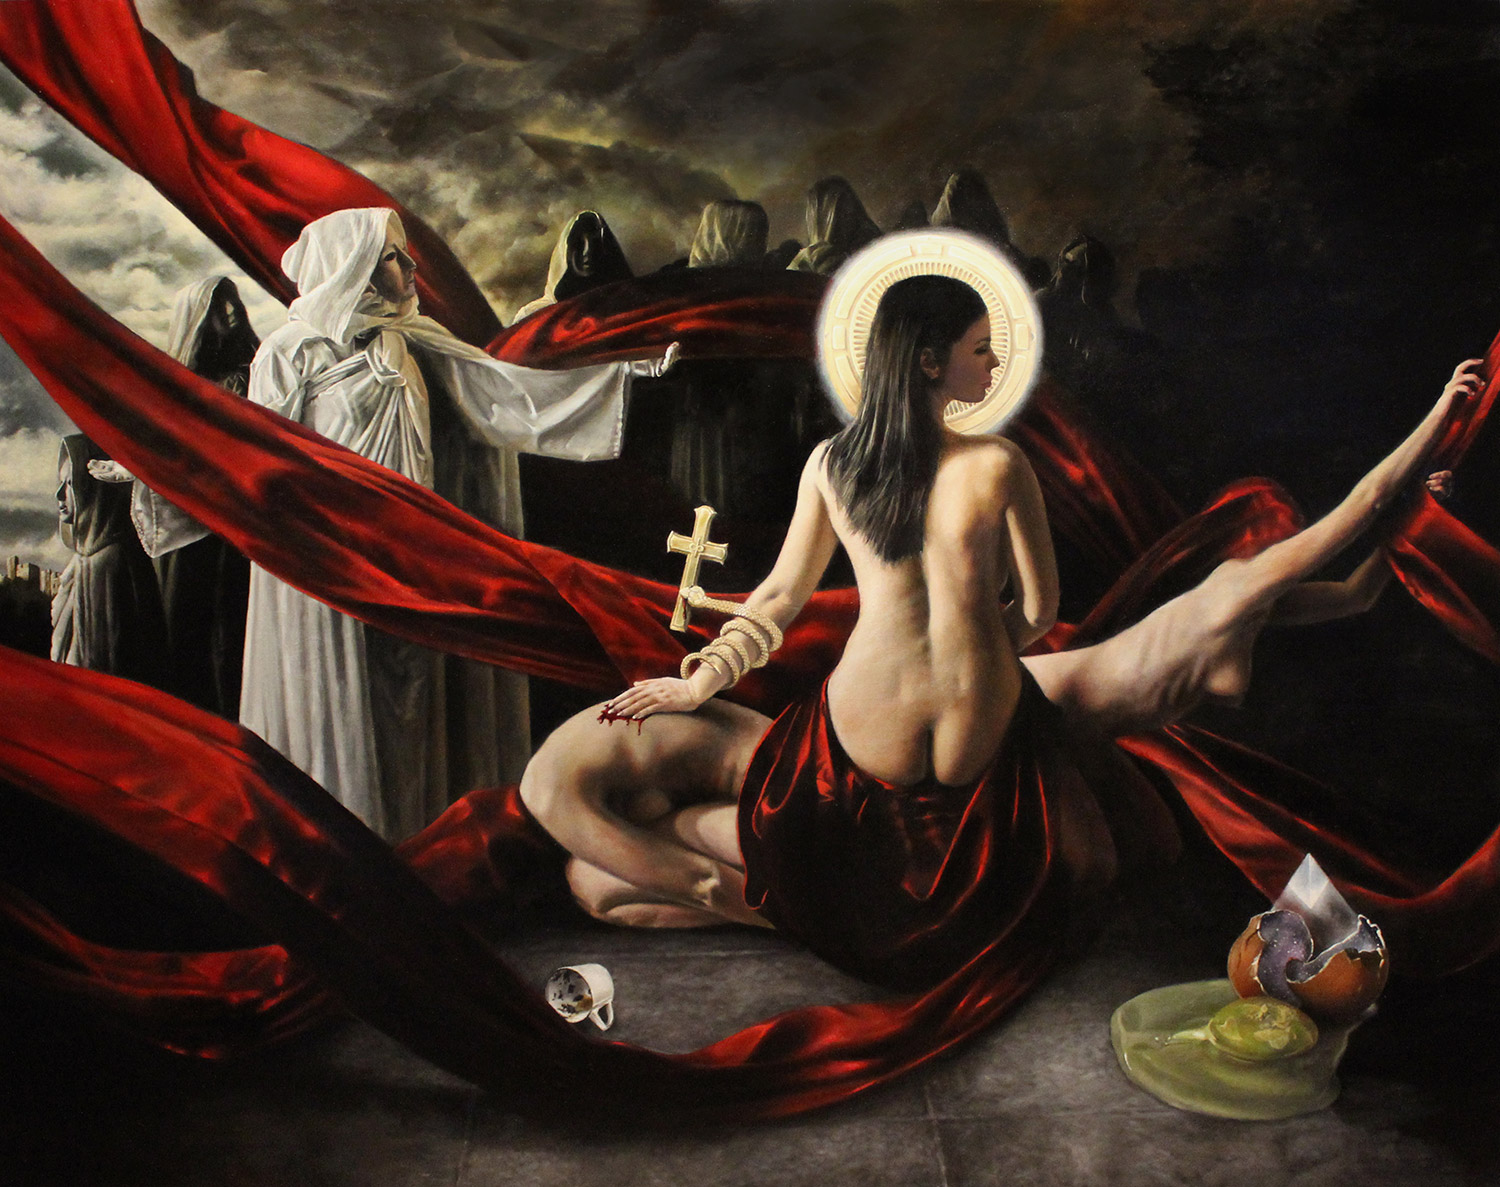 Christopher Pew - red scarves, white-robed figures, nude, religious imagery